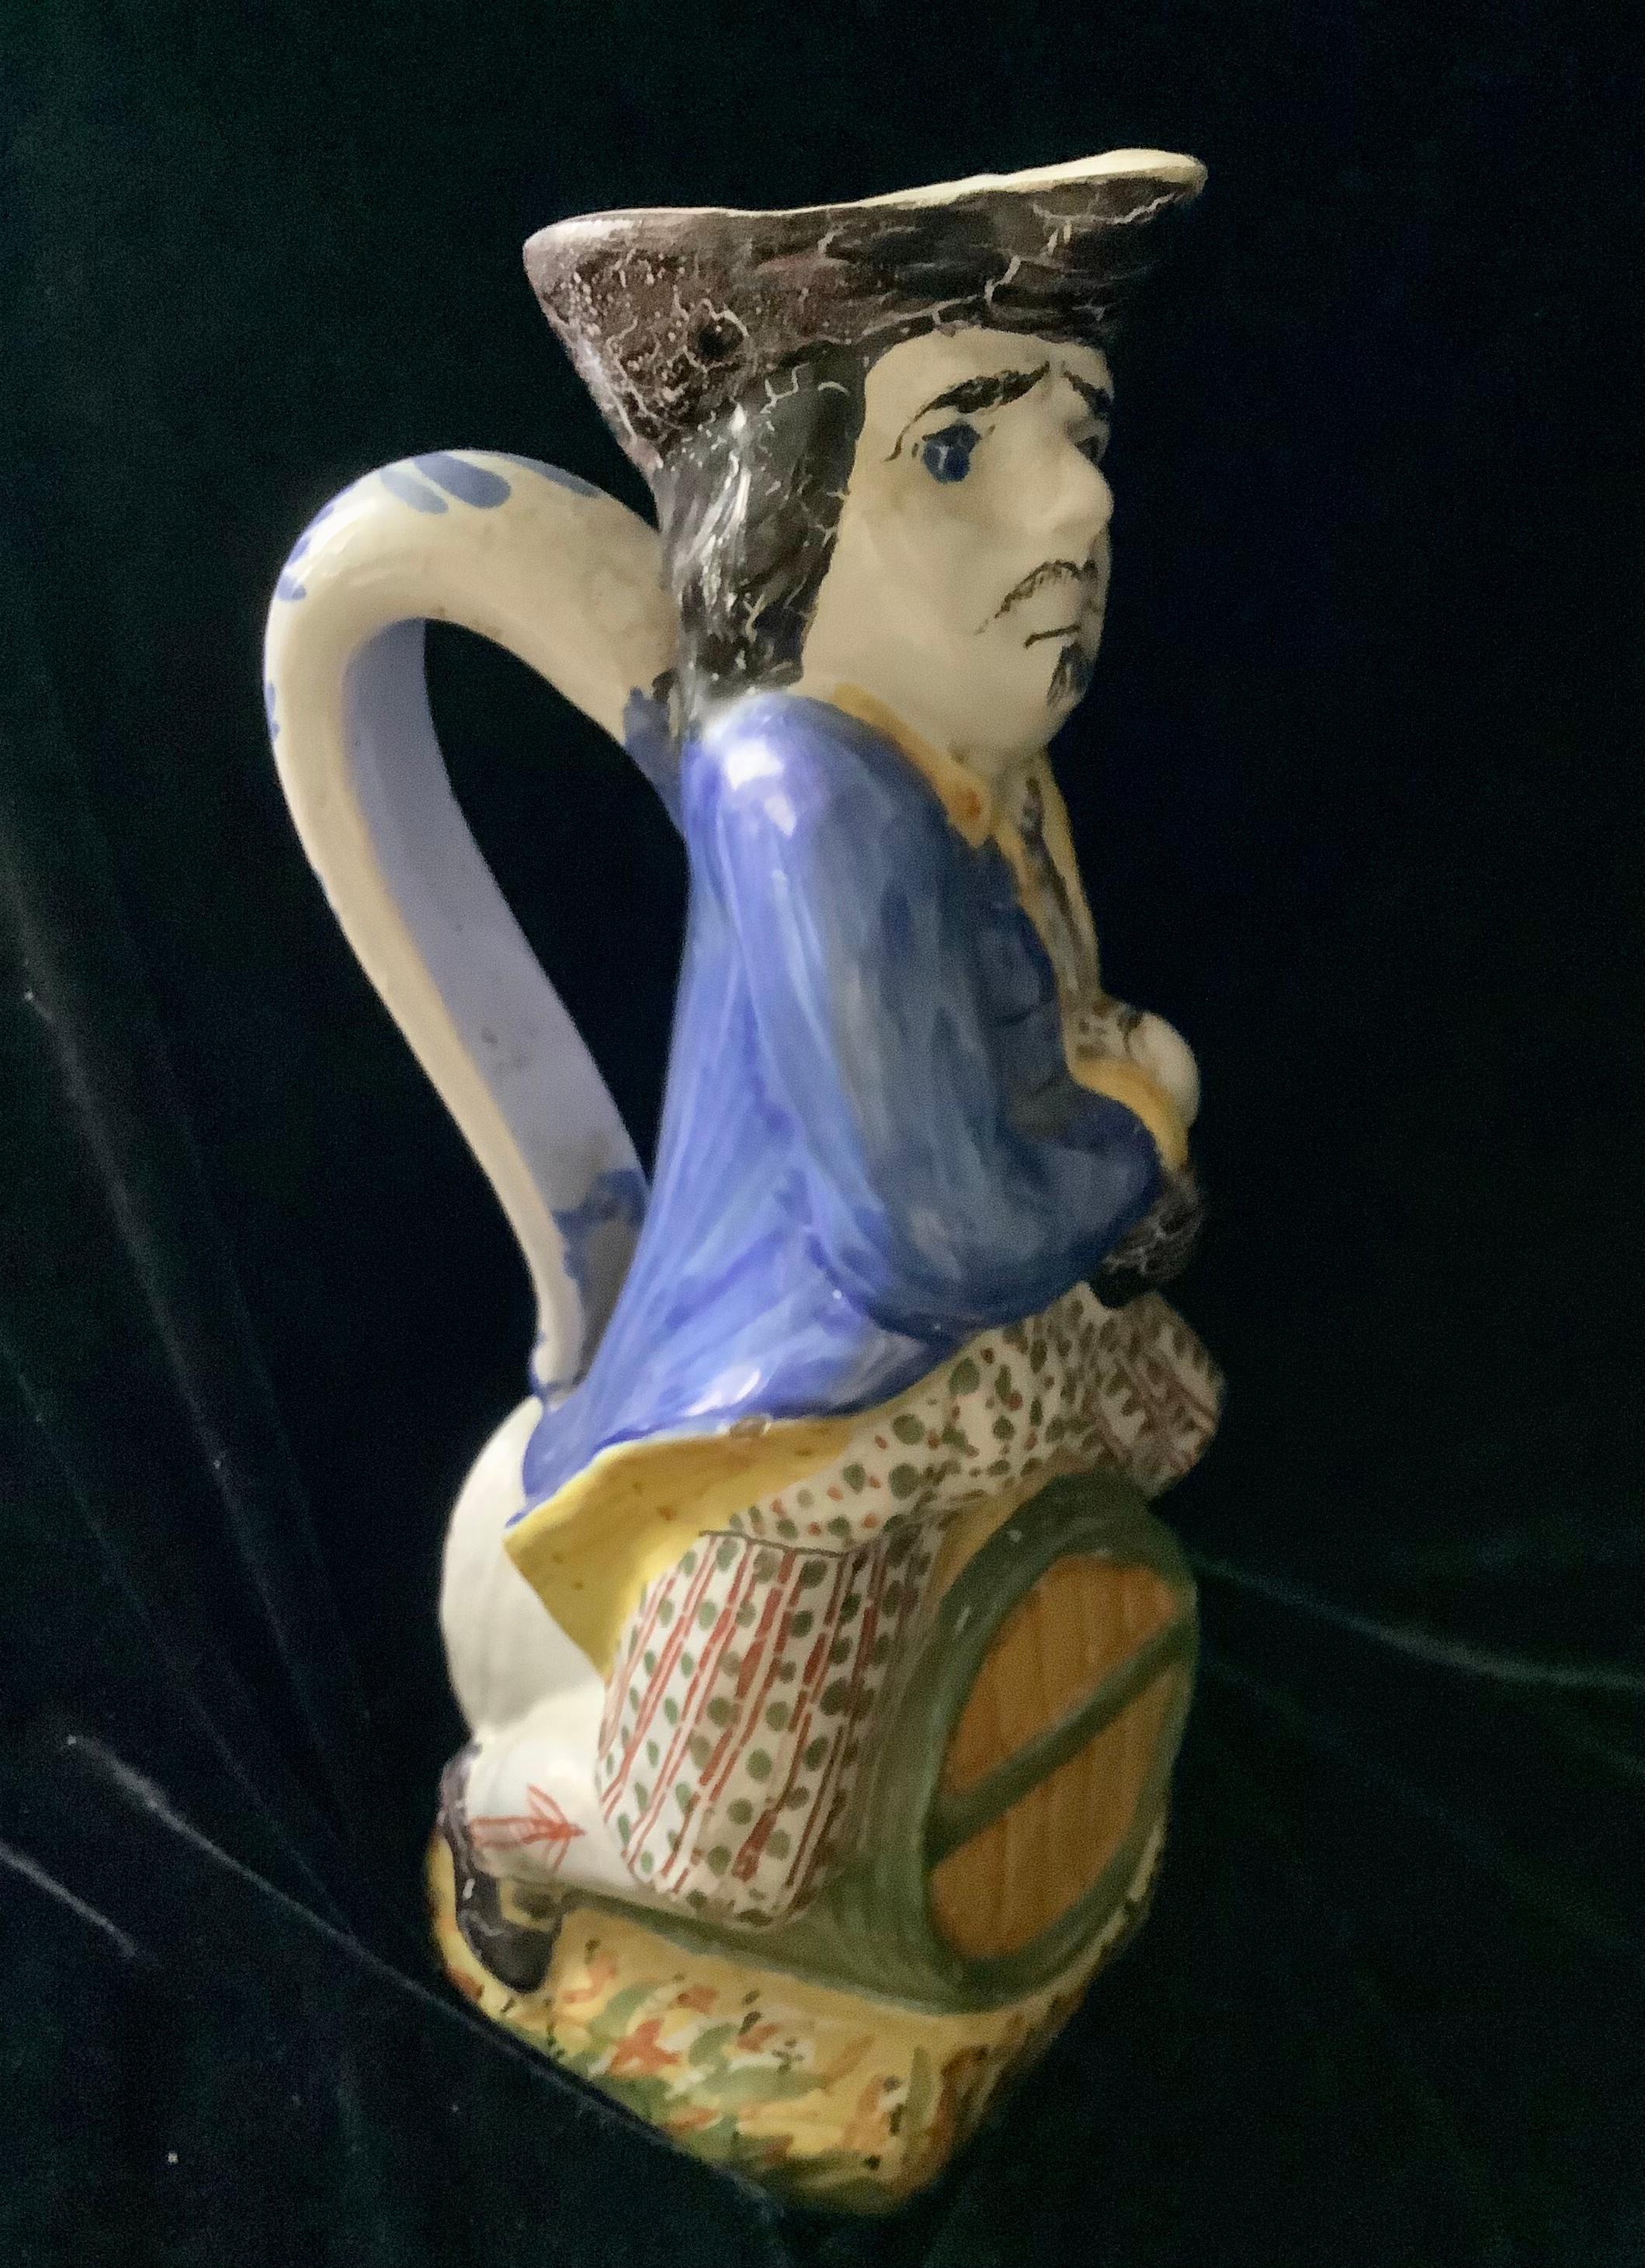 English Staffordshire ceramic Toby Jug figure with jug in right hand and sitting on a barrel. 